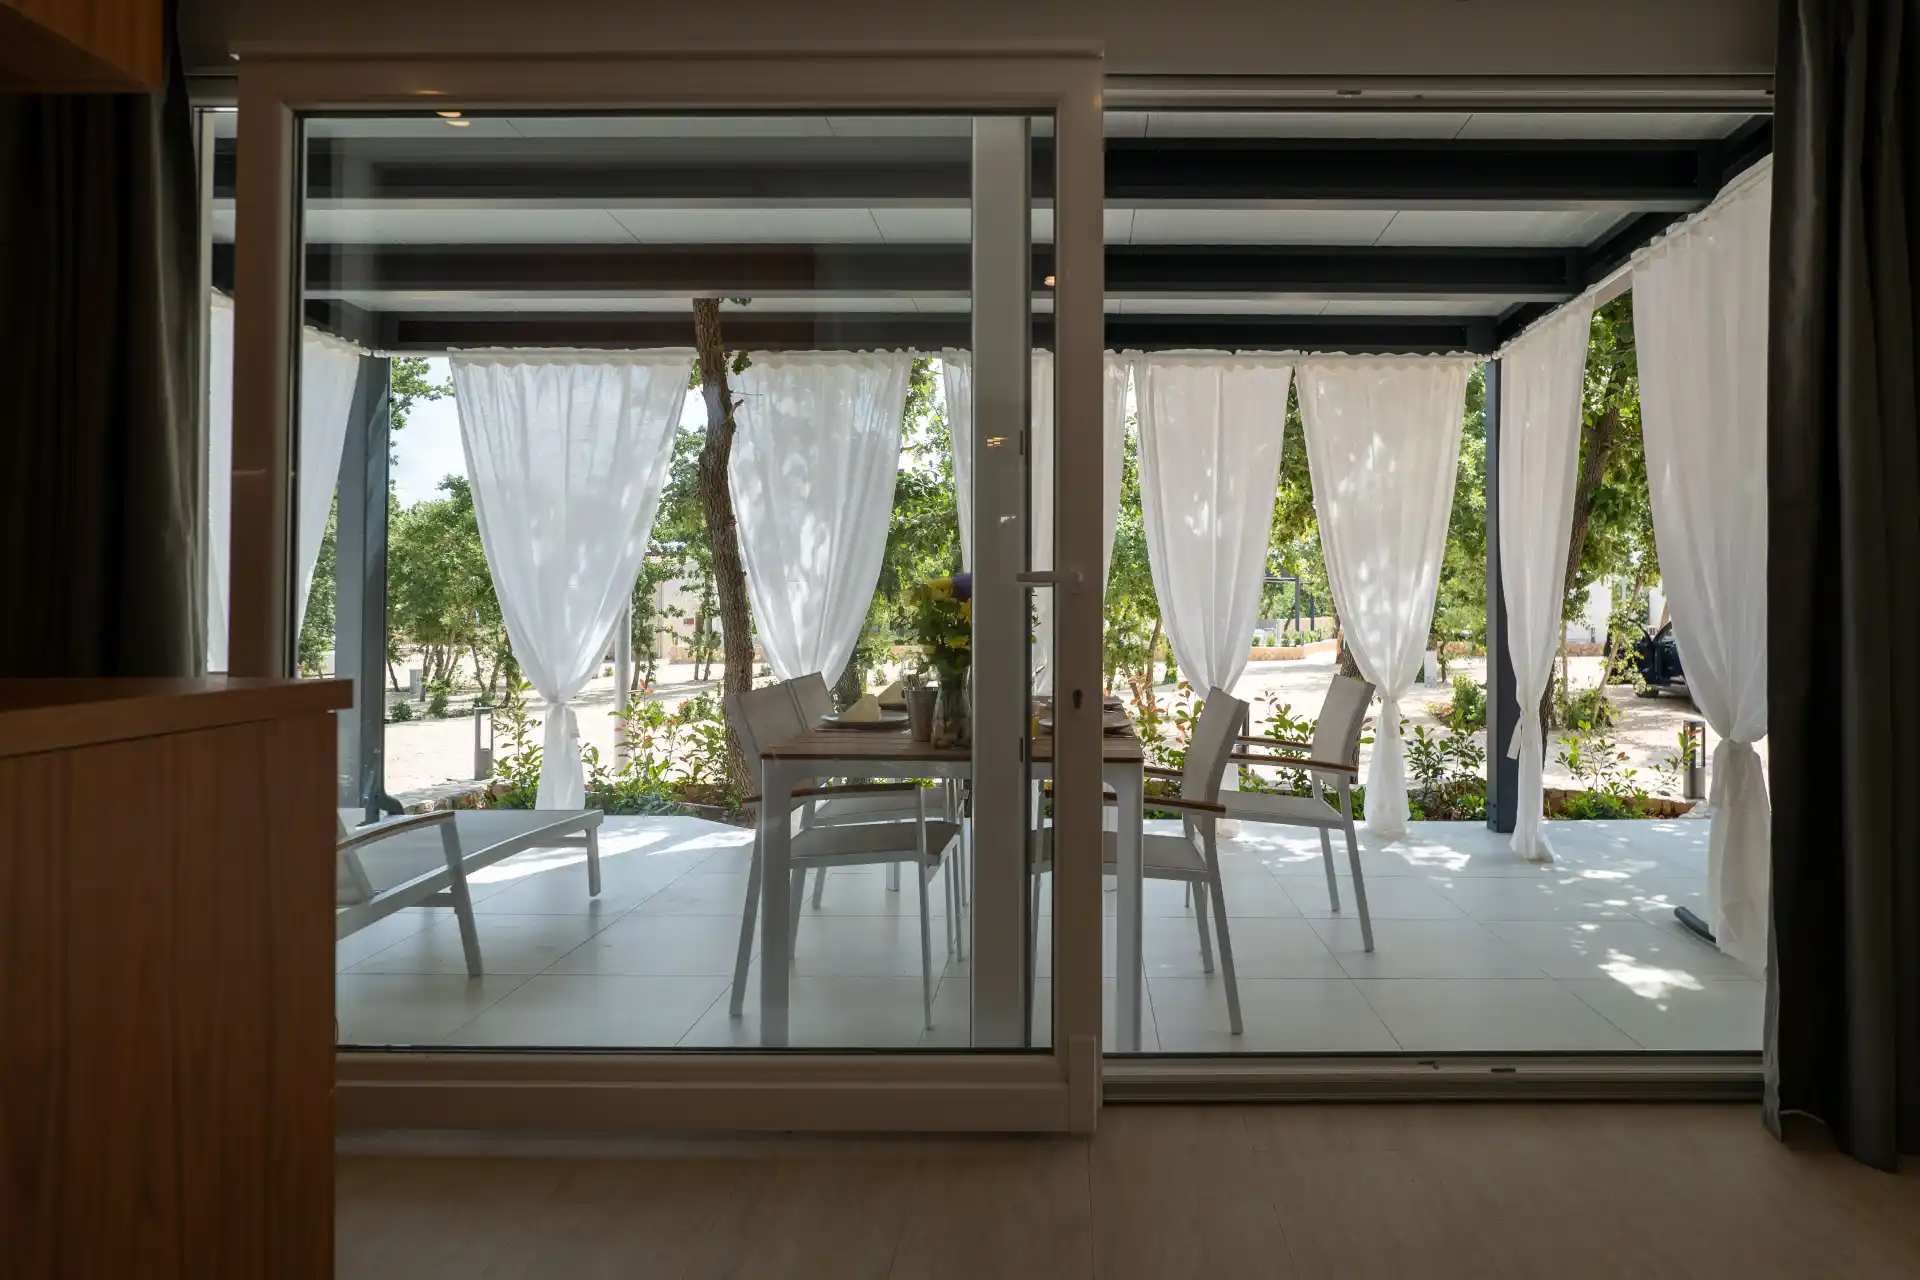 View from inside of mobile home to a terrace with white curtains and outdoor furniture